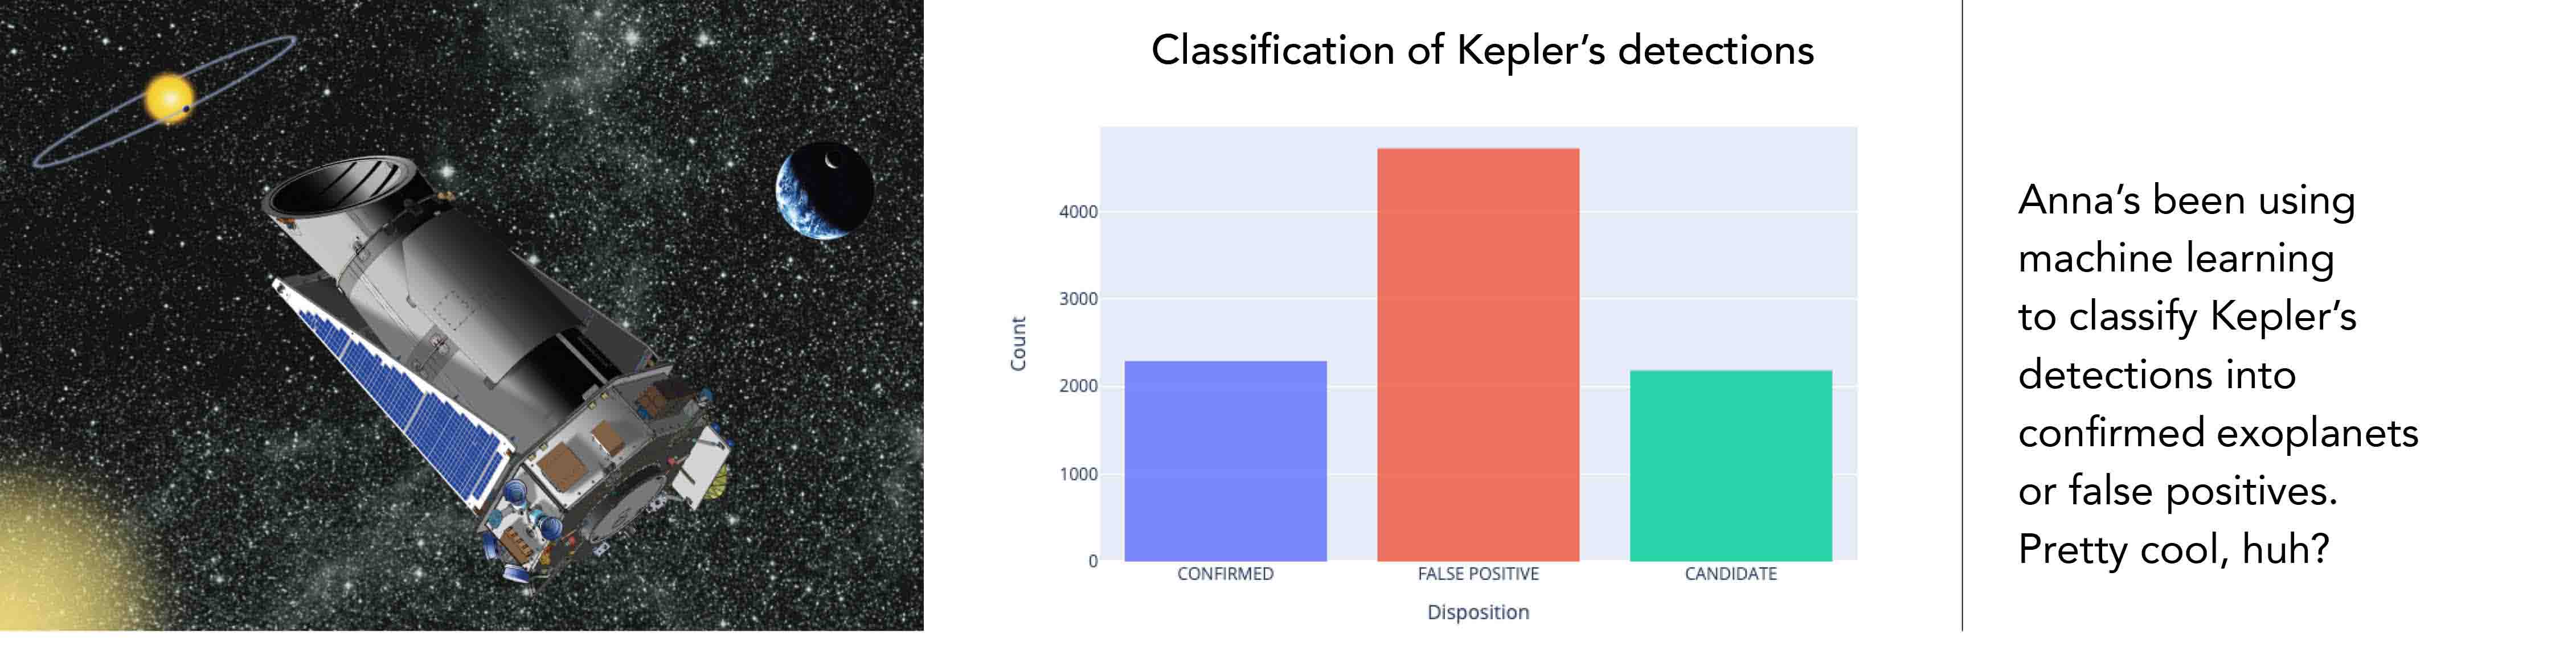 Anna’s been using machine learning to classify Kepler’s detections into confirmed exoplanets or false positives. Pretty cool, huh?...